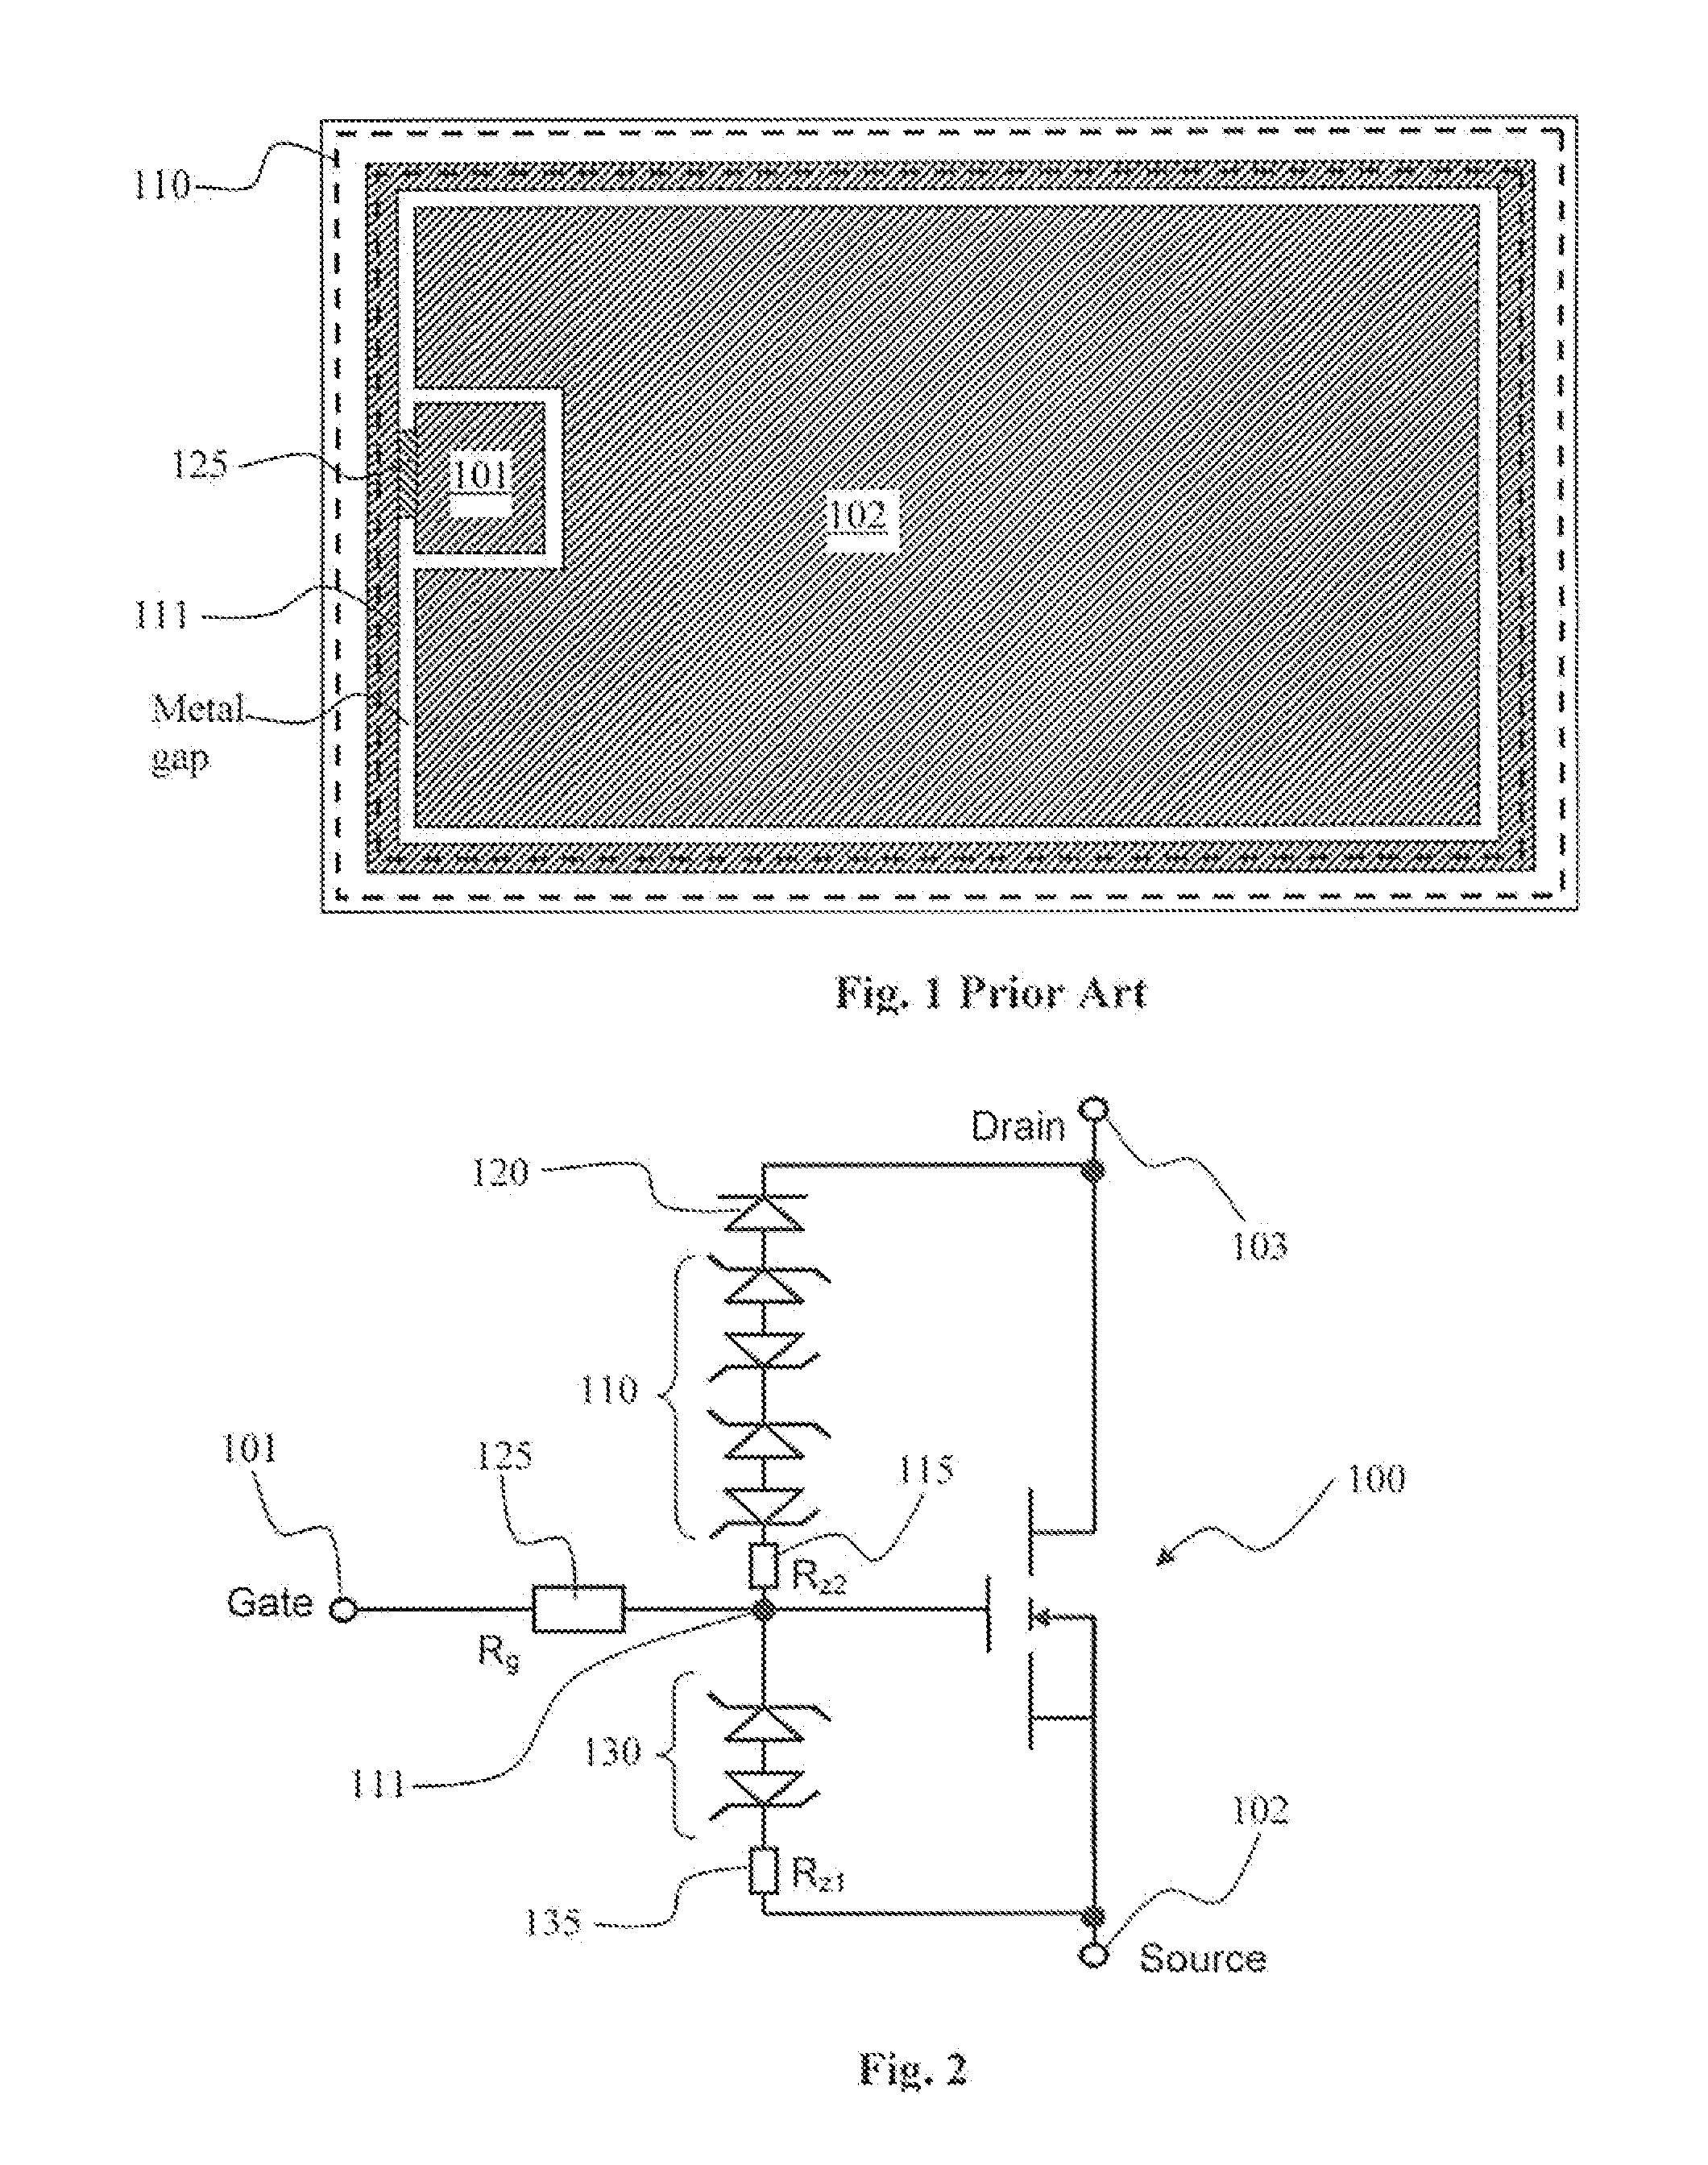 Configuration of gate to drain (GD) clamp and ESD protection circuit for power device breakdown protection